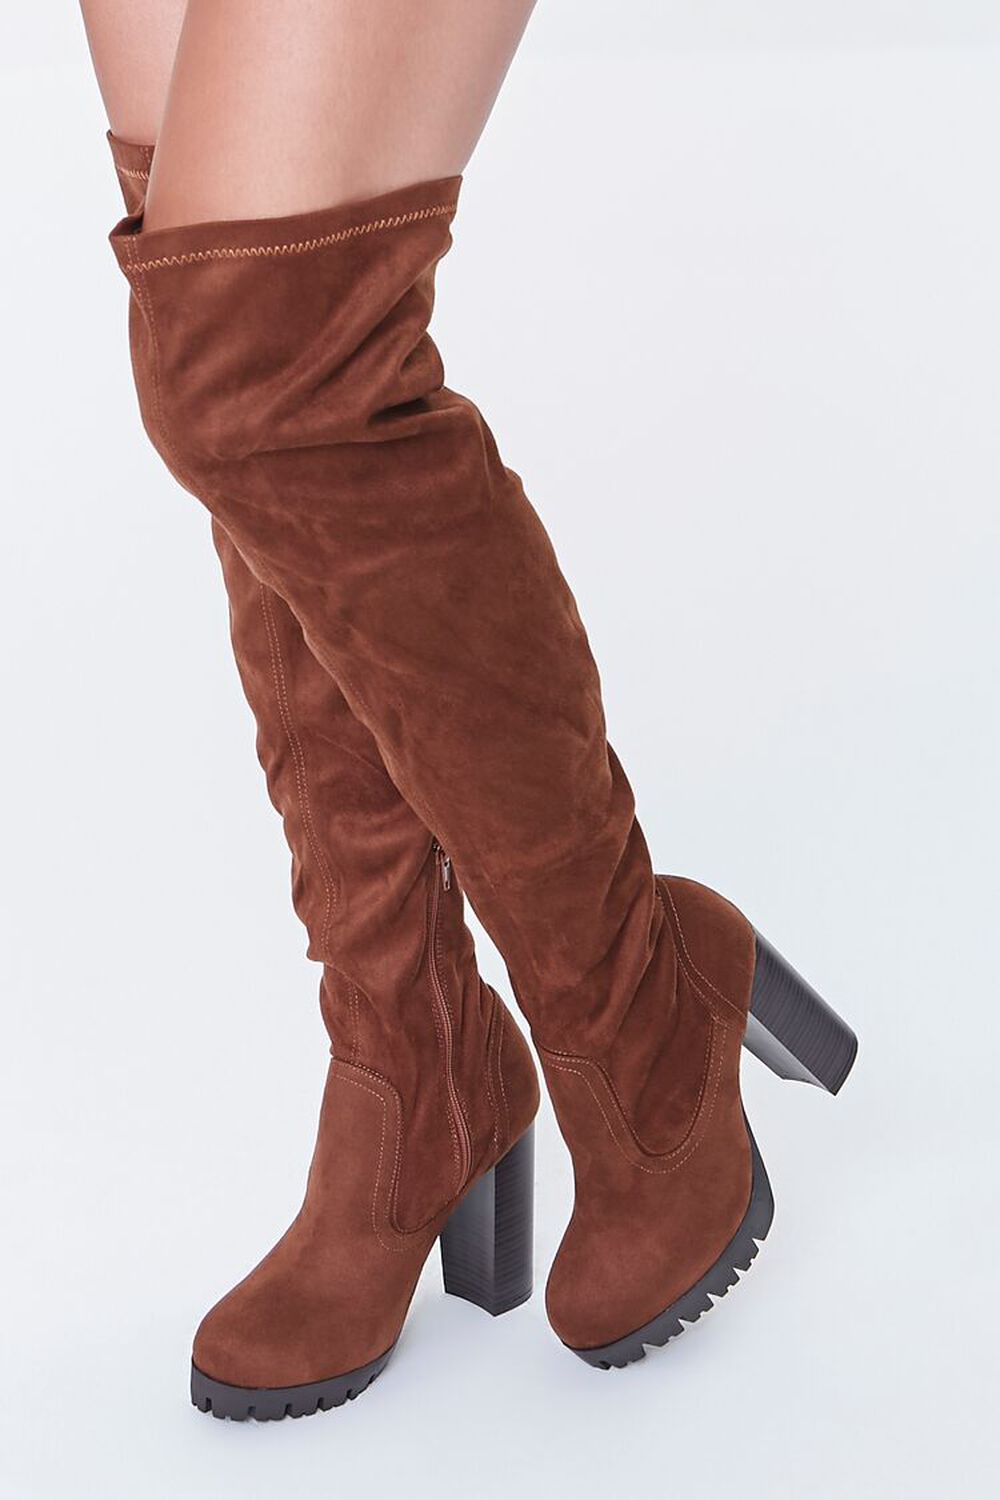 BROWN Faux Suede Over-the-Knee Boots, image 1